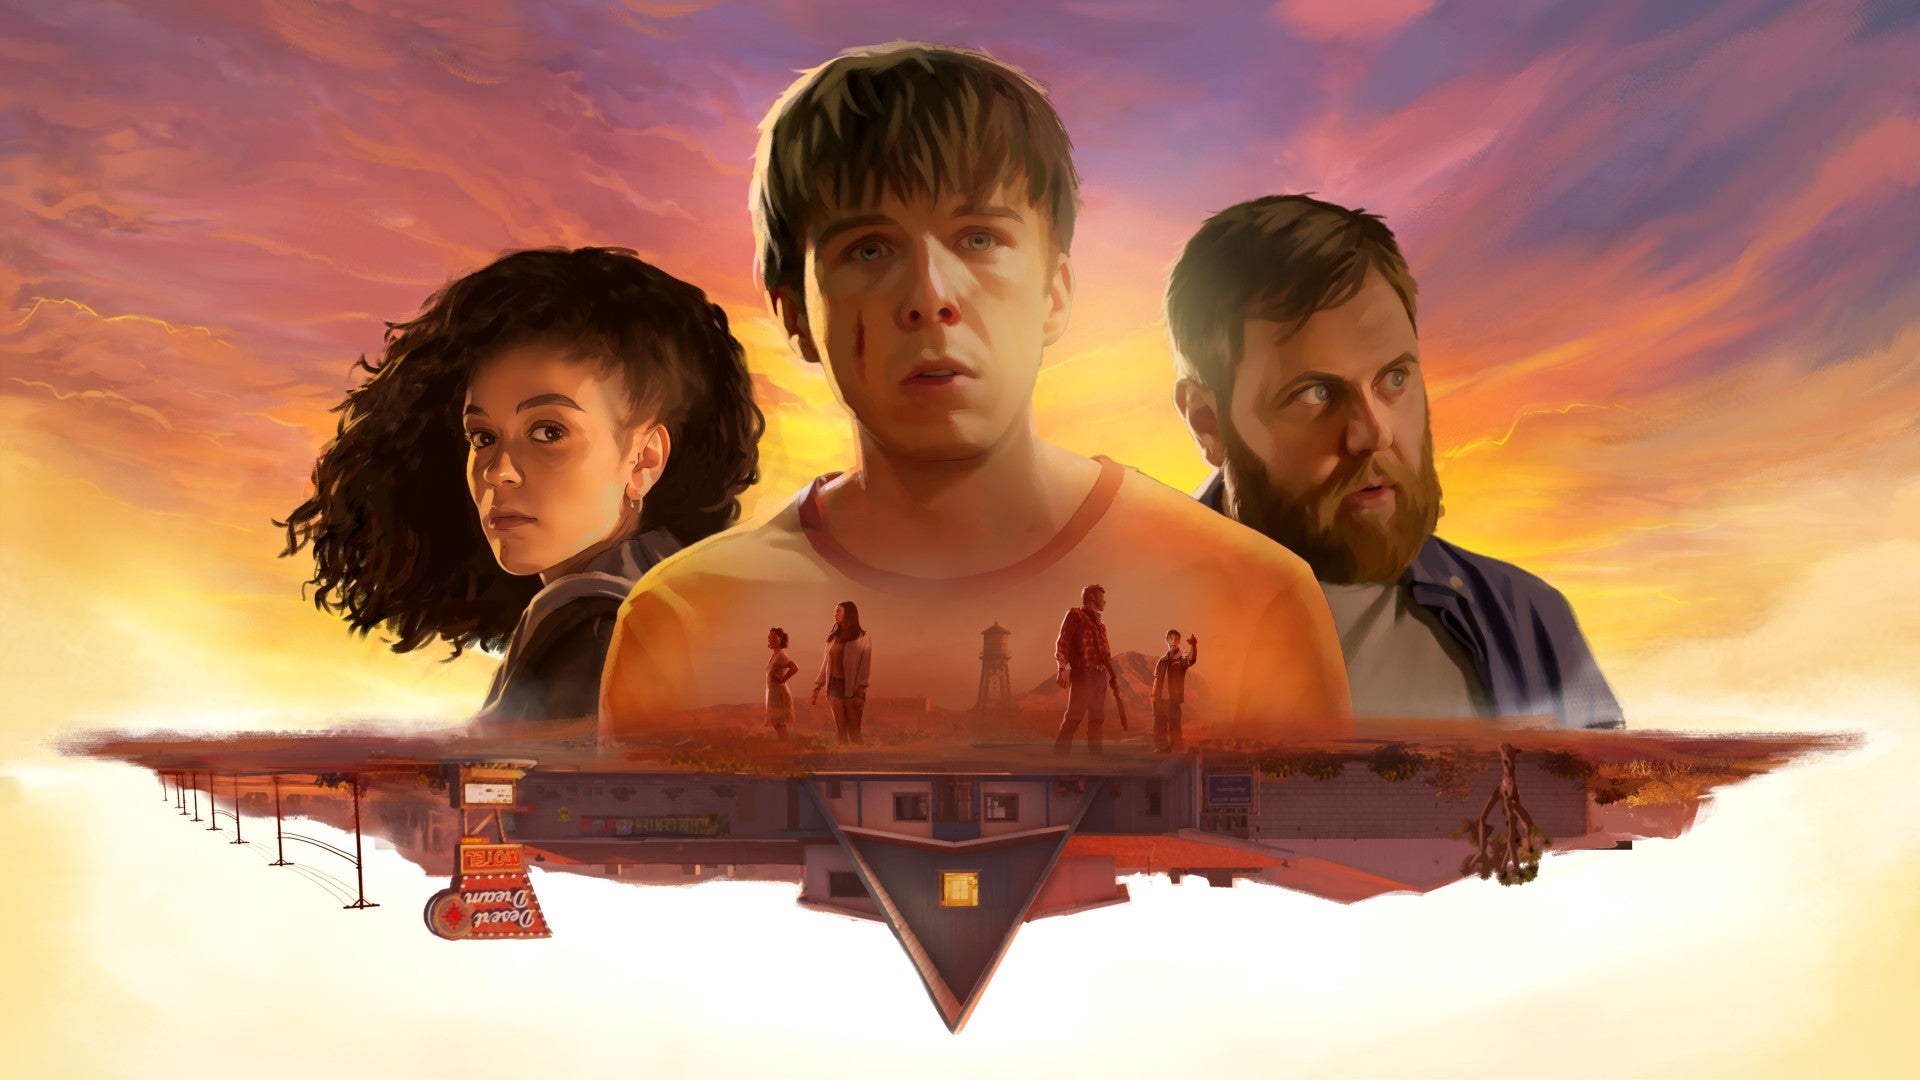 As Dusk Fall art showing headshots of Zoe, Jay, and Vince from left to right, depicted above the upside down Desert Dream motel.